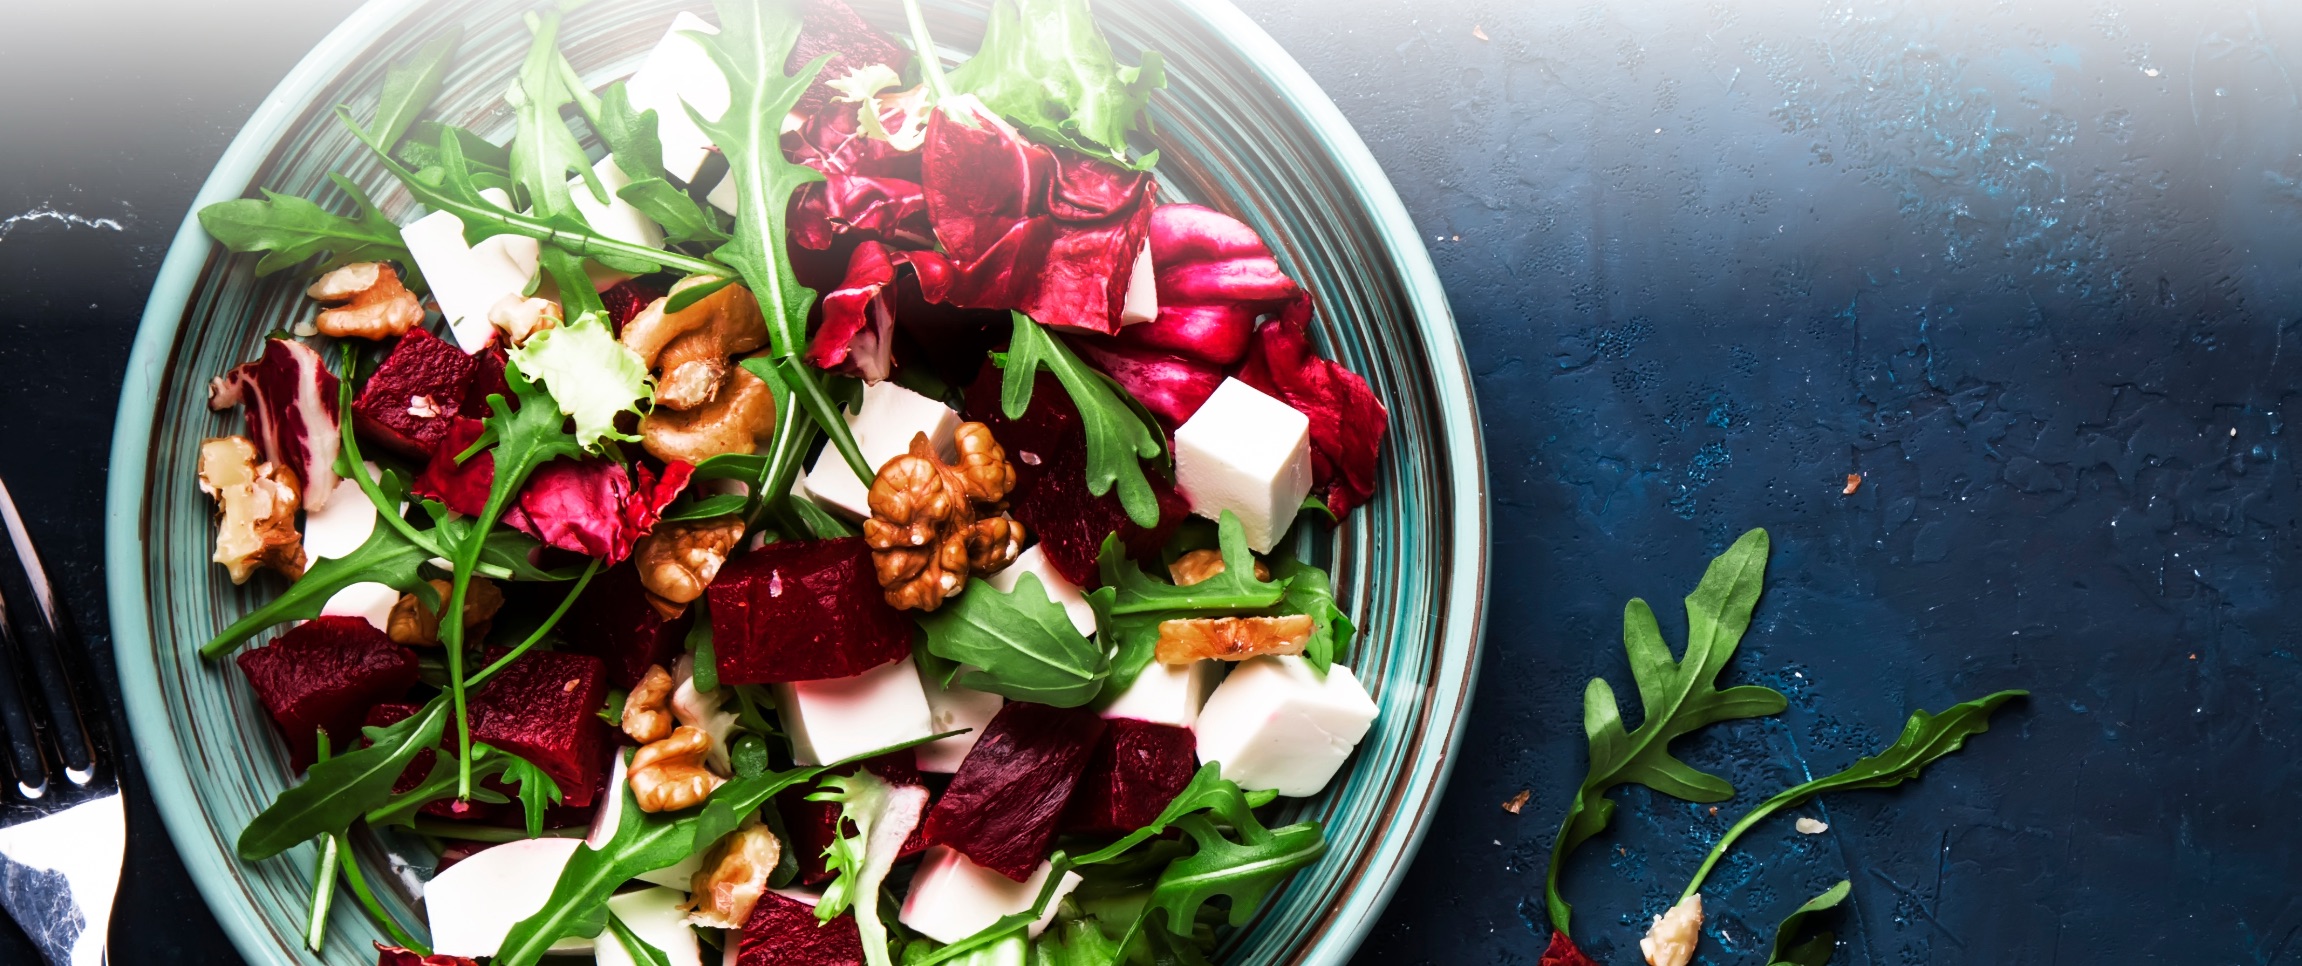 Grilled Radicchio Salad with Blue Cheese Crumbles